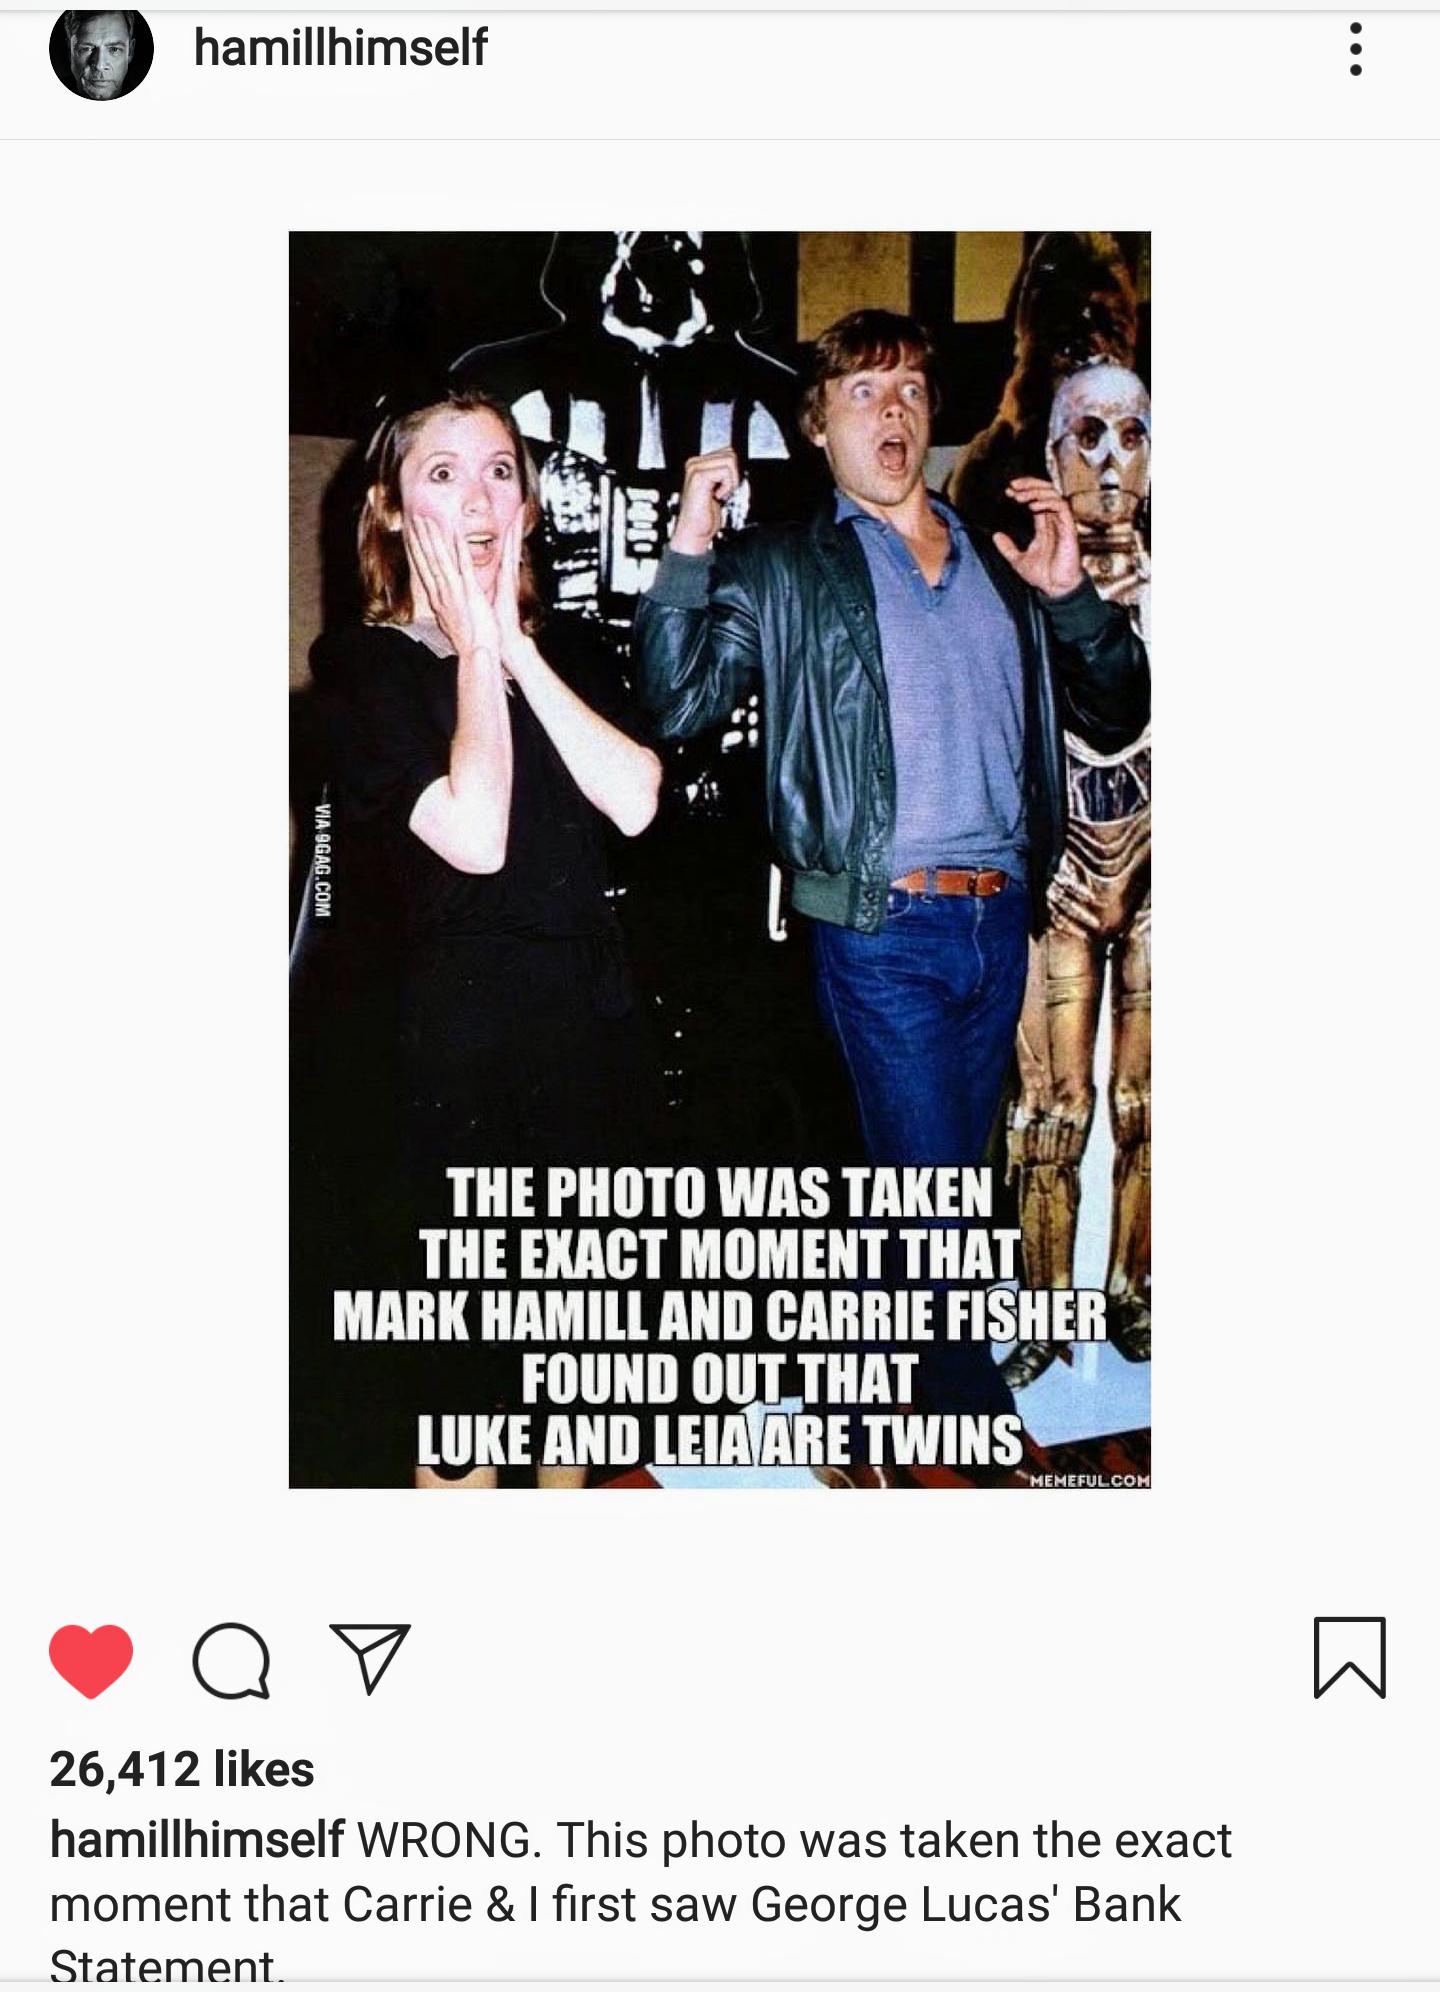 ot-memes star-wars-memes ot-memes text: hamillhimself THE PHOTO ms TAKEN THE EXACT MOMENT THAT MARK HAMILL AND CARRIE F191ER FOUND OUT THAT LUKE AND LEIA ARE TWINS 26,412 likes hamillhimself WRONG. This photo was taken the exact moment that Carrie & I first saw George Lucas' Bank Statement 